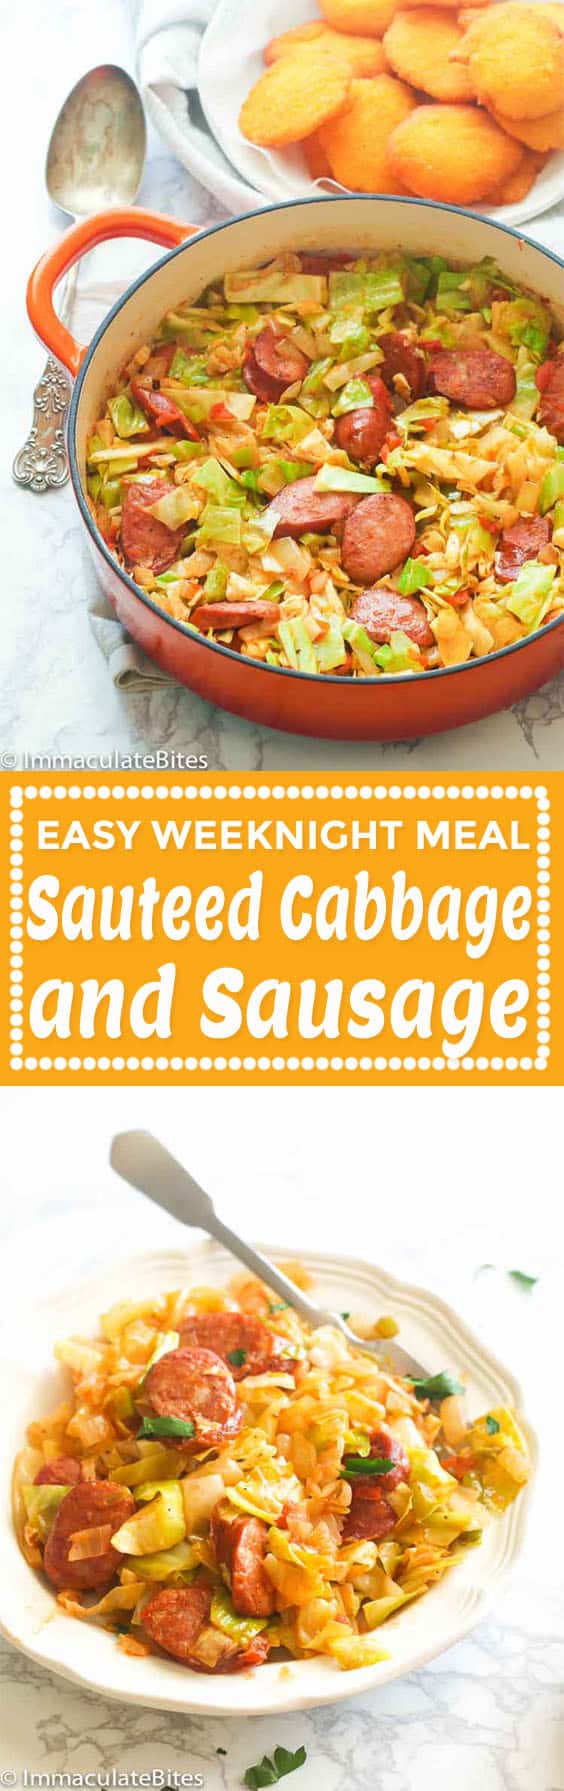 Sauteed Cabbage and Sausage.